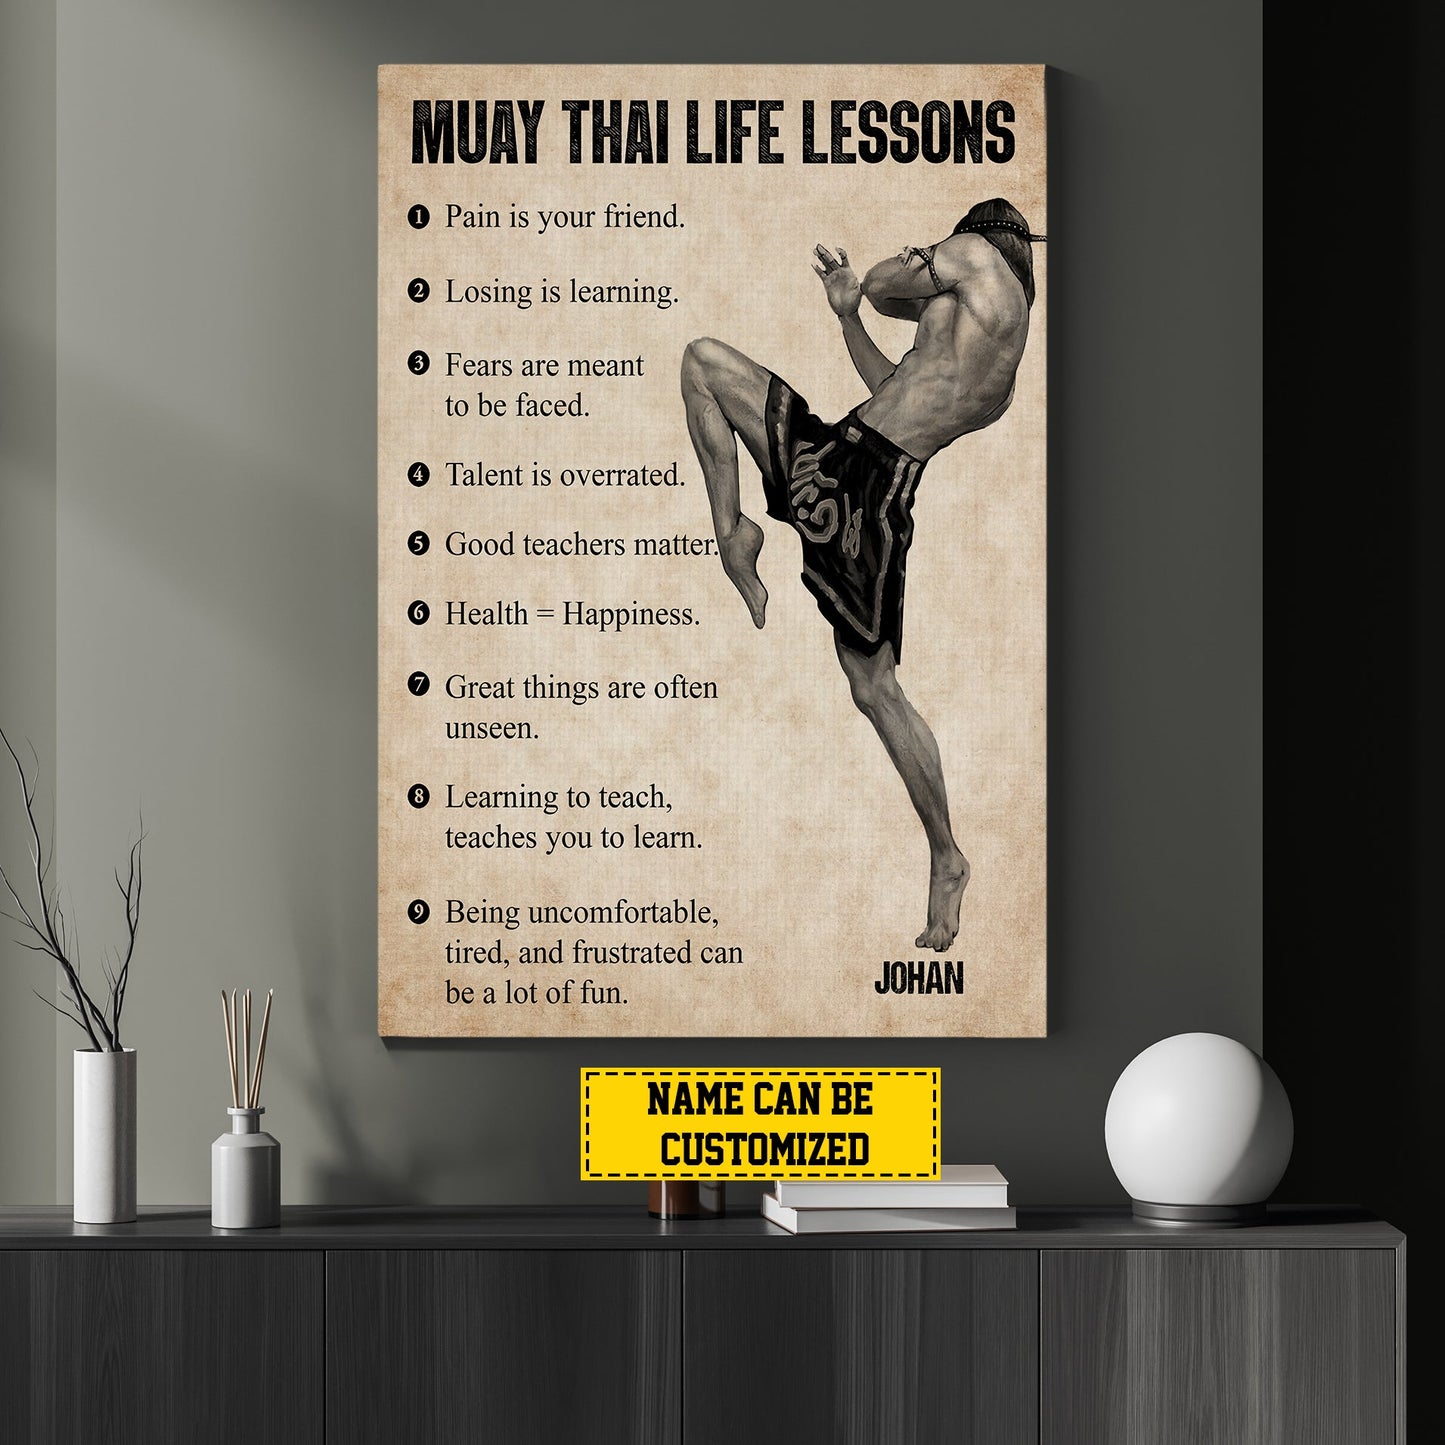 Muay Thai Life Lessons, Personalized Motivational Muay Thai Canvas Painting, Inspirational Quotes Wall Art Decor, Poster Gift For Muay Thai Lovers